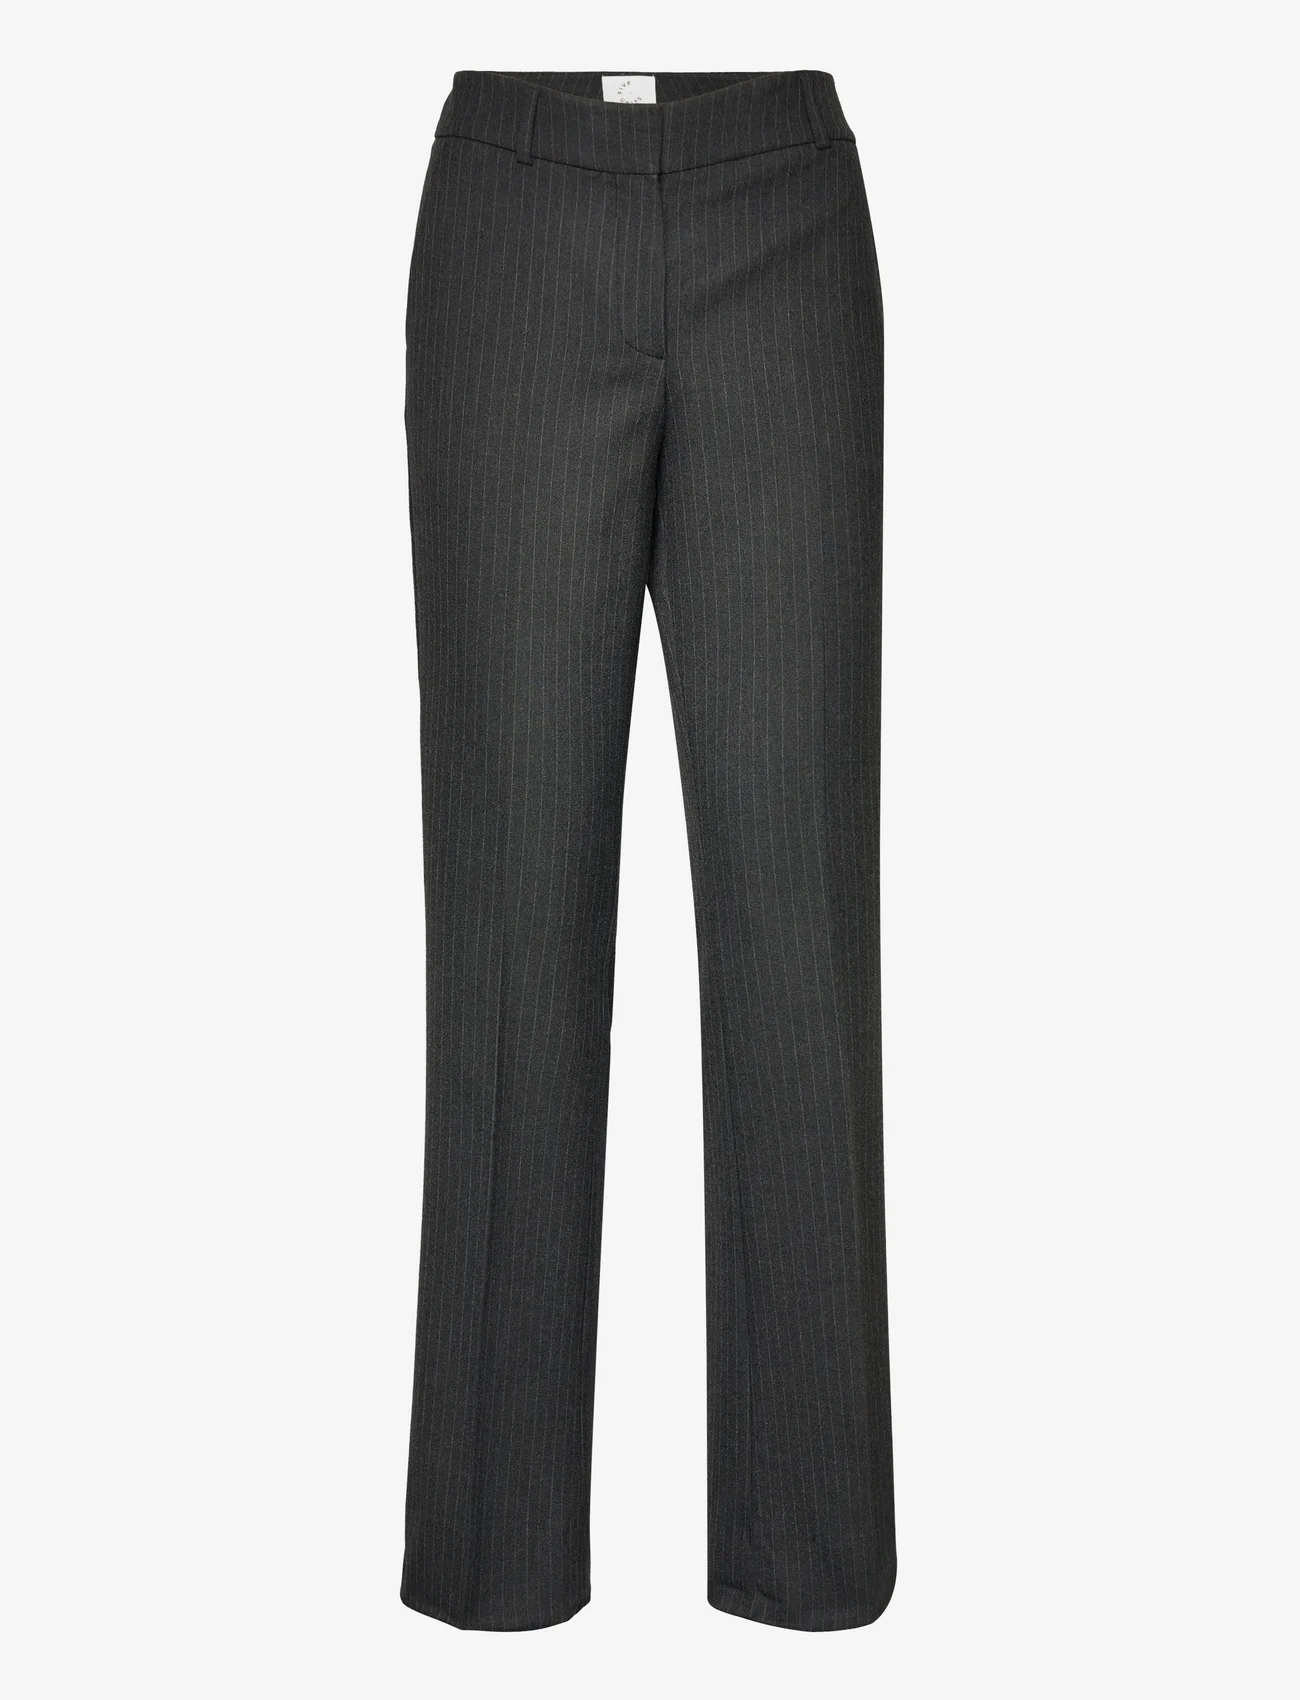 FIVEUNITS - Clara - tailored trousers - charcoal pinstripe - 0